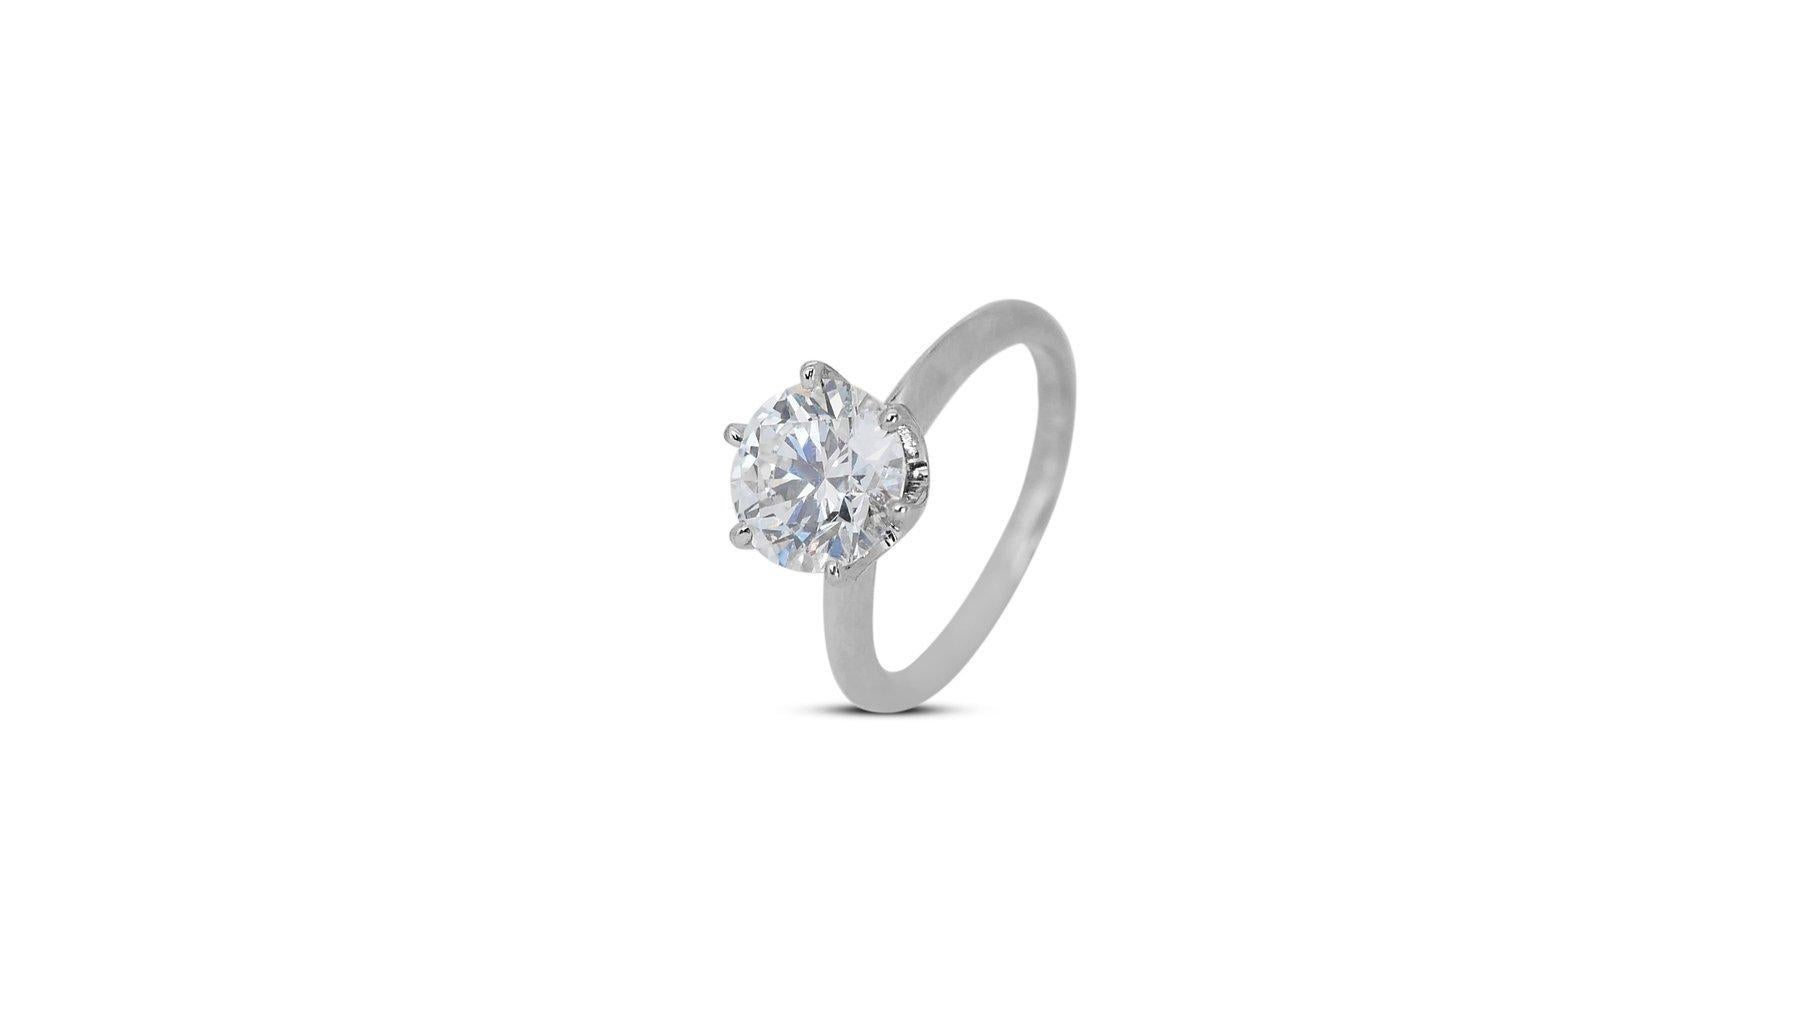 Timeless 3.09ct Diamond Solitaire Ring in 18k White Gold - GIA Certified

Experience unparalleled elegance with this 18k white gold diamond solitaire ring, featuring a magnificent 3.09-carat round-cut diamond. The diamond boasts an exquisite color